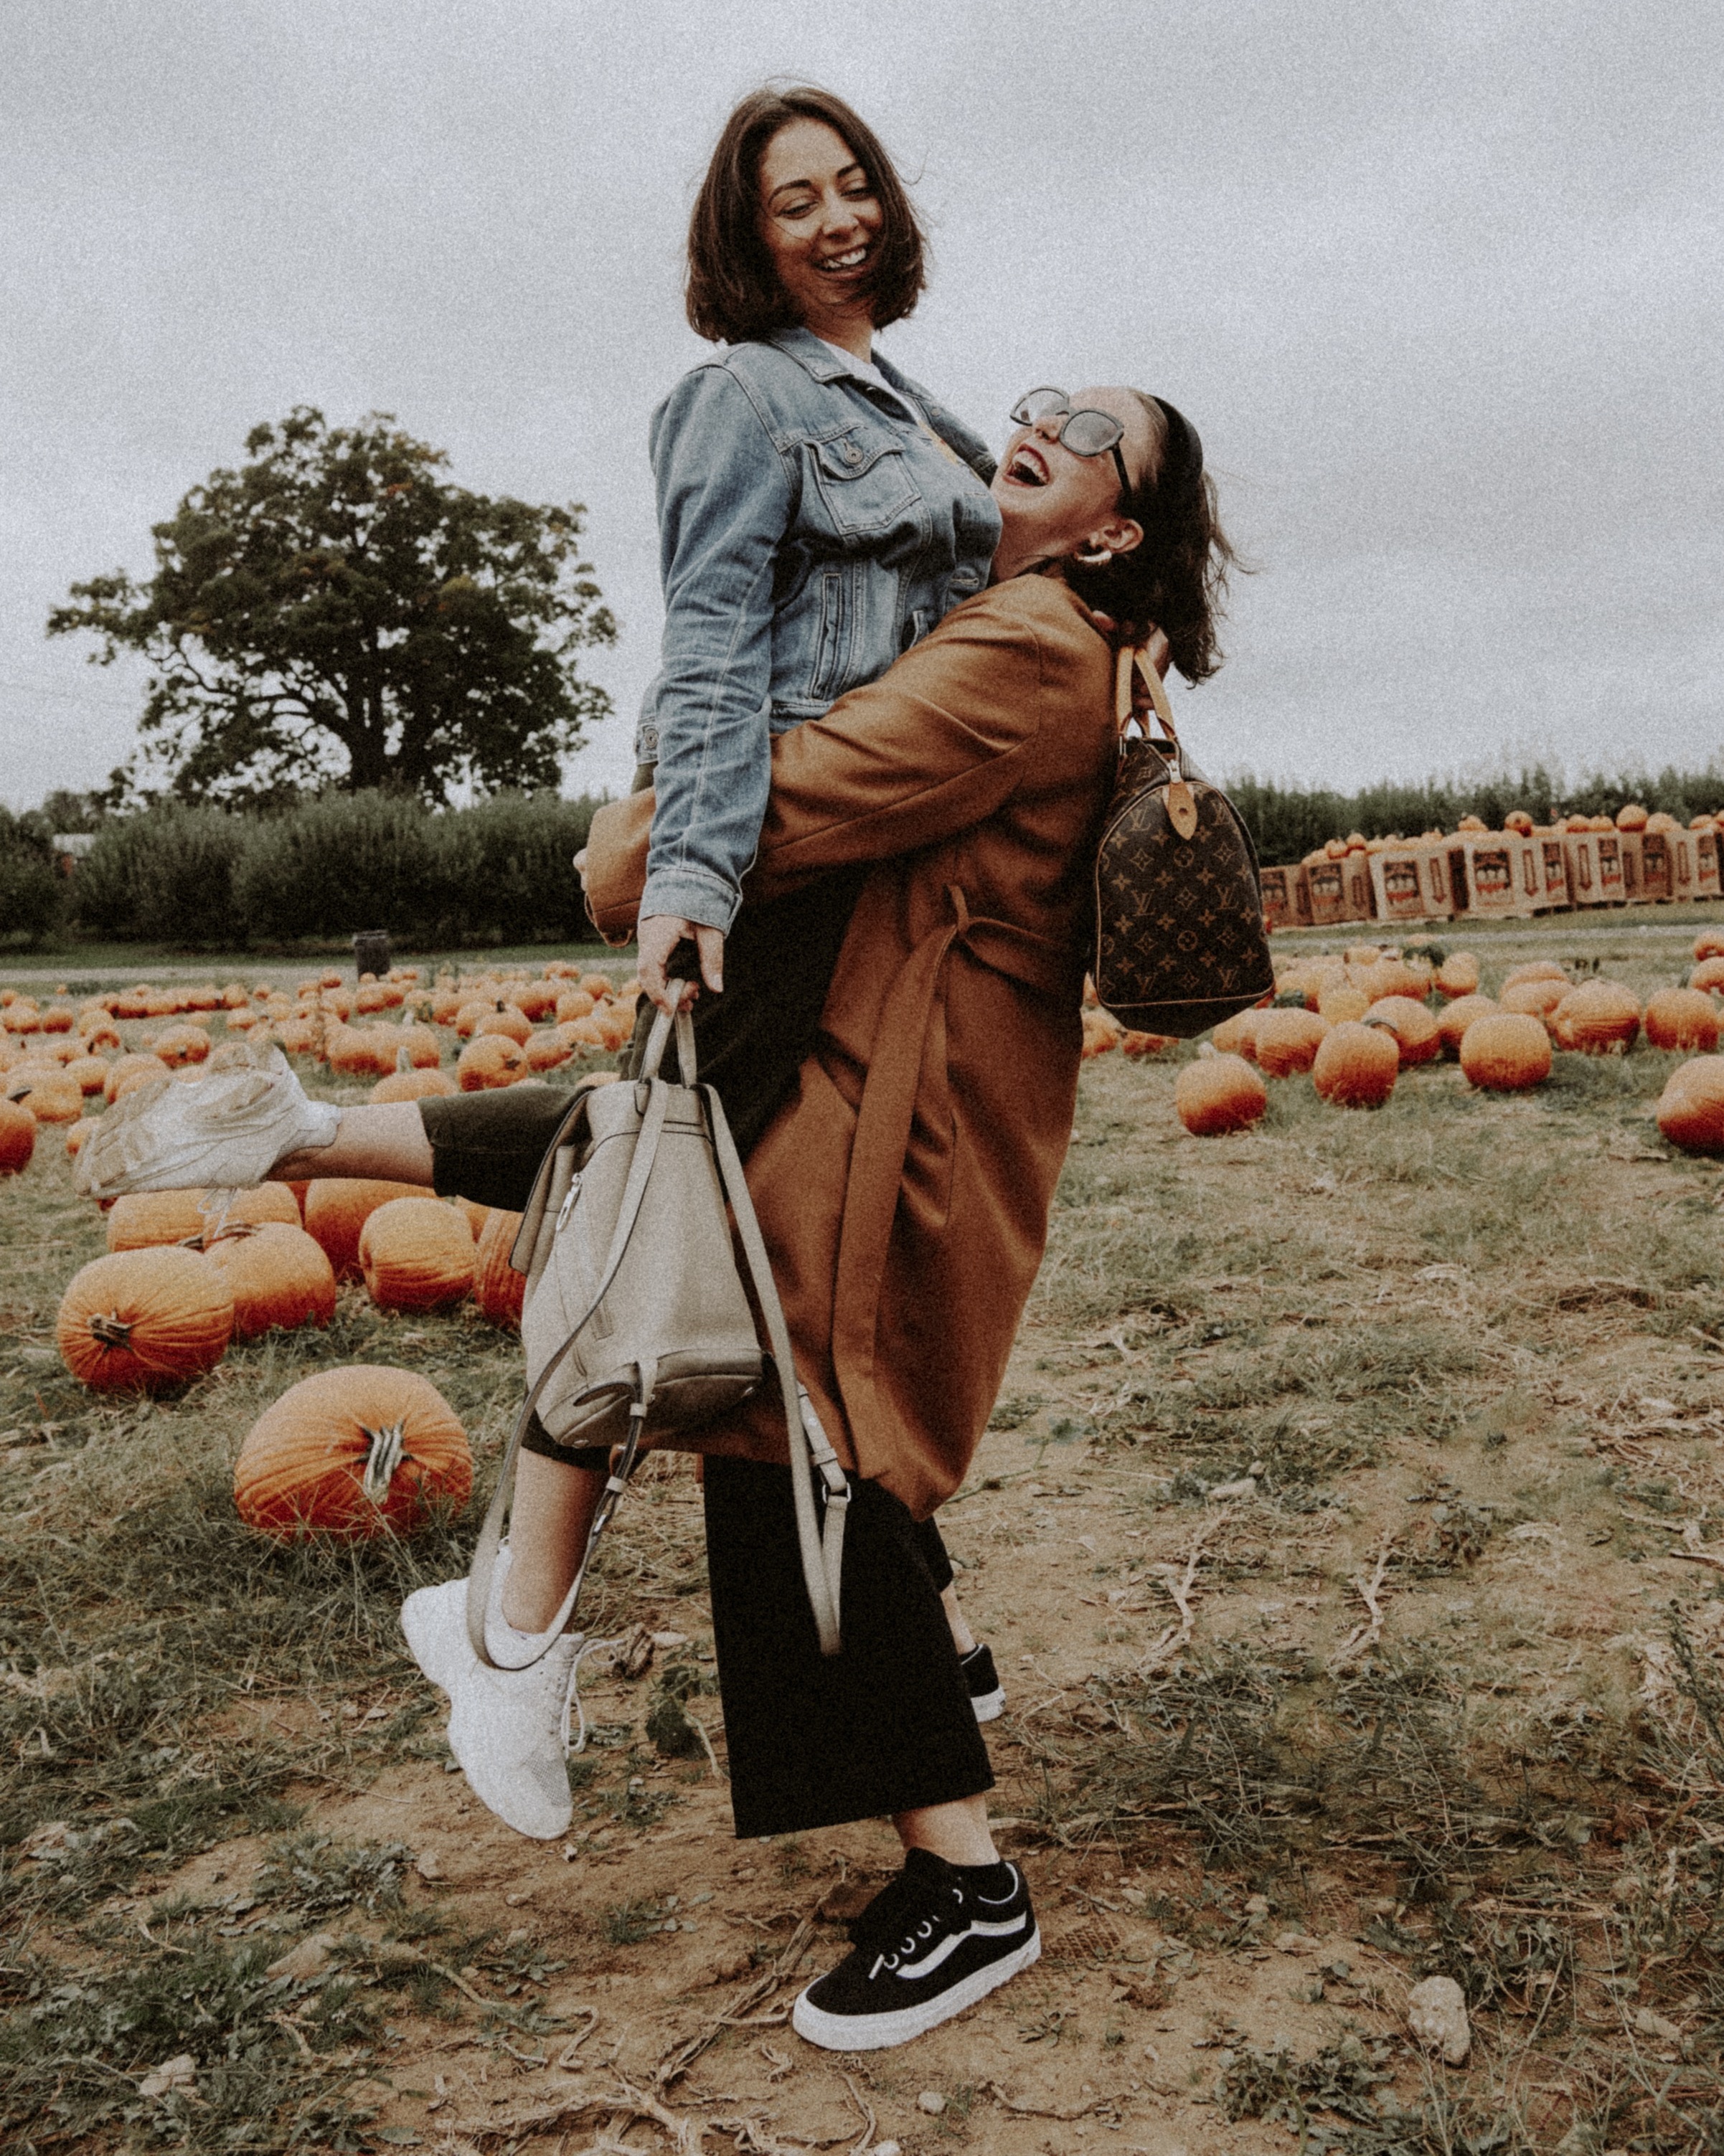 Girls Trip Apple Picking and Pumpkin Picking Outside of NYC - Simply by Simone – Ms Westchester – Danielle Colicci – barton Orchard – Dutchess County - Simone Piliero - Photographer Riley McCarthy –- Fall Fashion - Fall Outfit - Fall Style - Apples - Tree - Louis Vuitton #fashion - Camel Coat - Black Jeans - Vans Sneakers - fashion poses - #outfit #style #fallfashion #falloutfit #westchestercounty #dutchesscounty #nyc #northofnyc #suburbs #pumpkinpicking #bloggerstyle #applepicking #bff #bffphotos #pumpkinfield